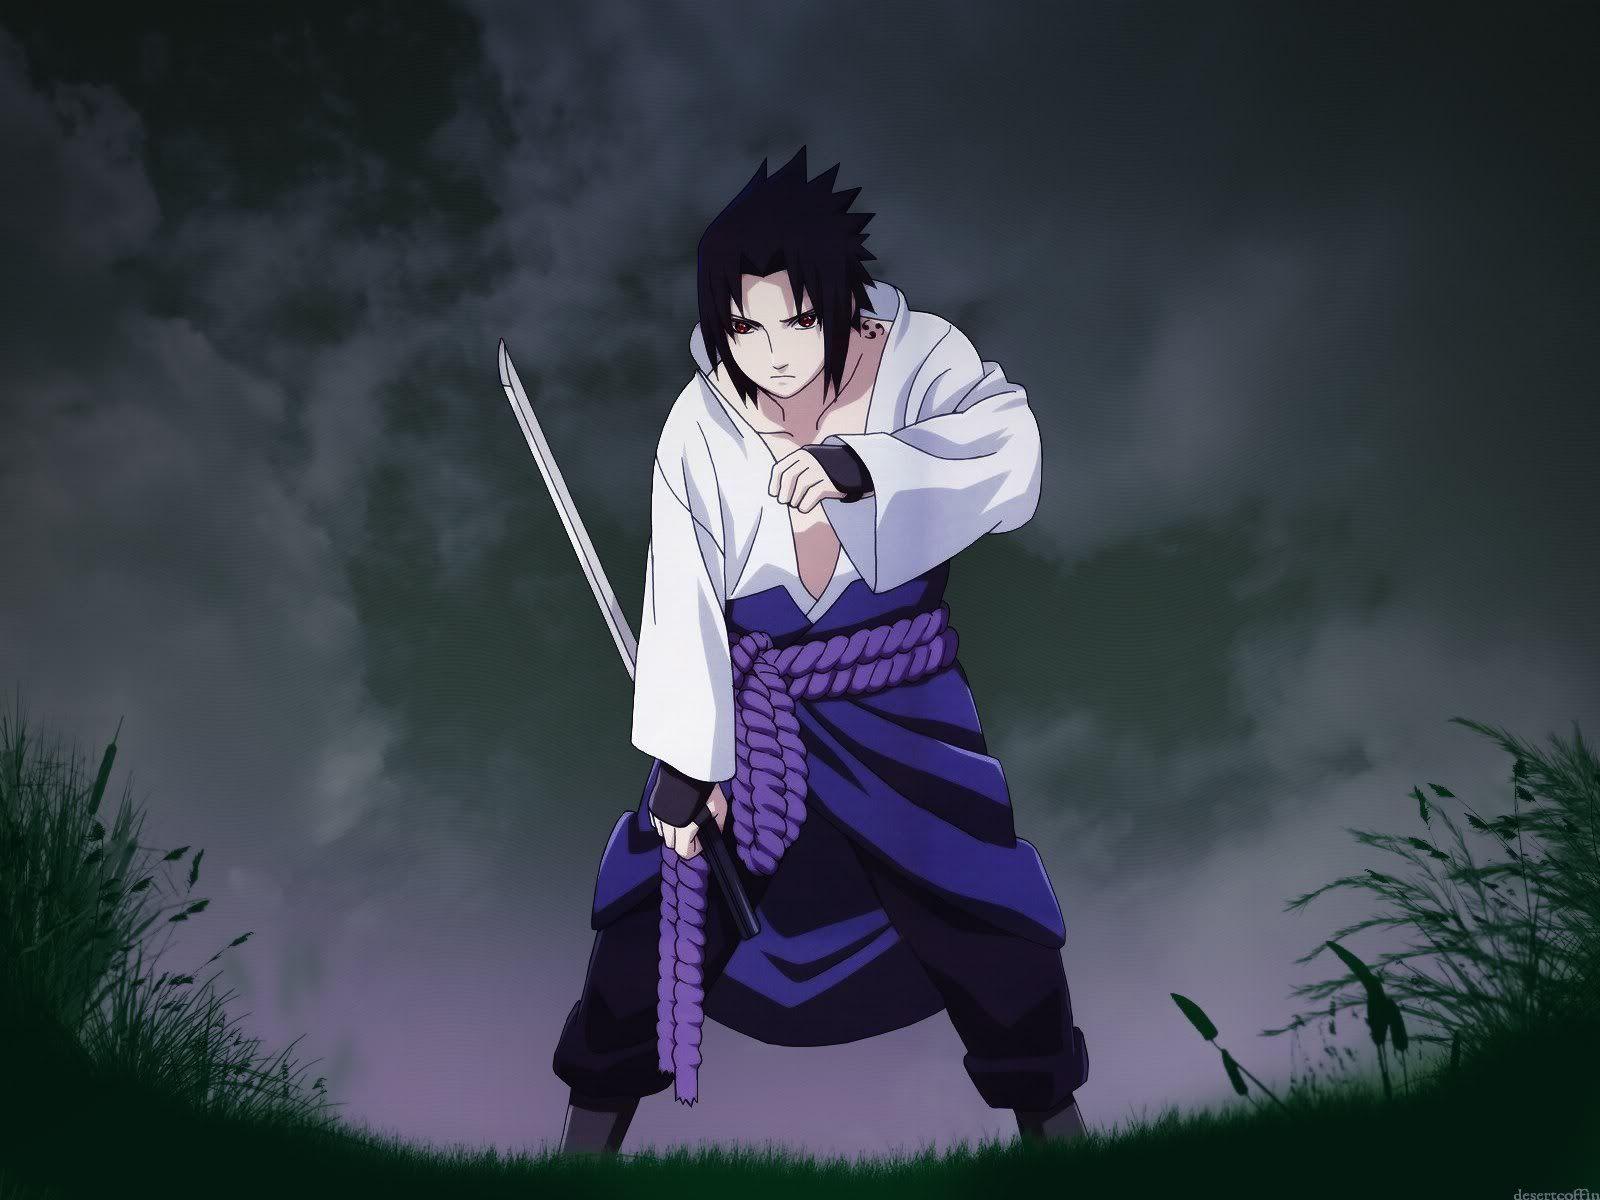 Wallpaper: Sasuke, and Picture for mobile and desktop